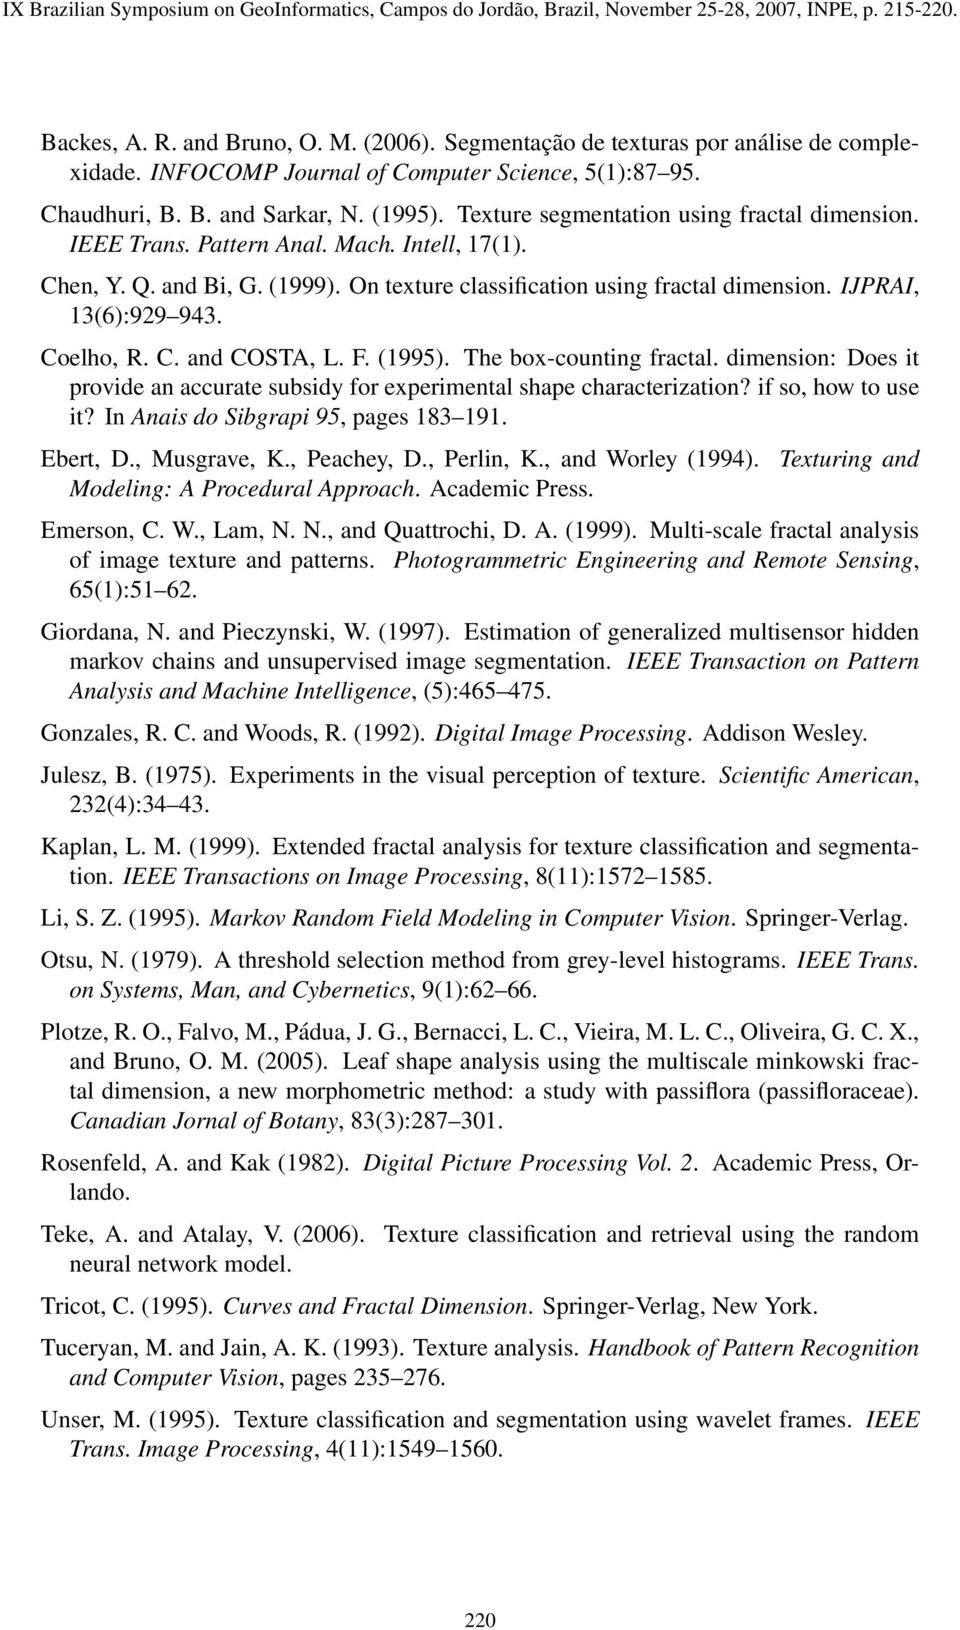 Coelho, R. C. and COSTA, L. F. (1995). The box-counting fractal. dimension: Does it provide an accurate subsidy for experimental shape characterization? if so, how to use it?